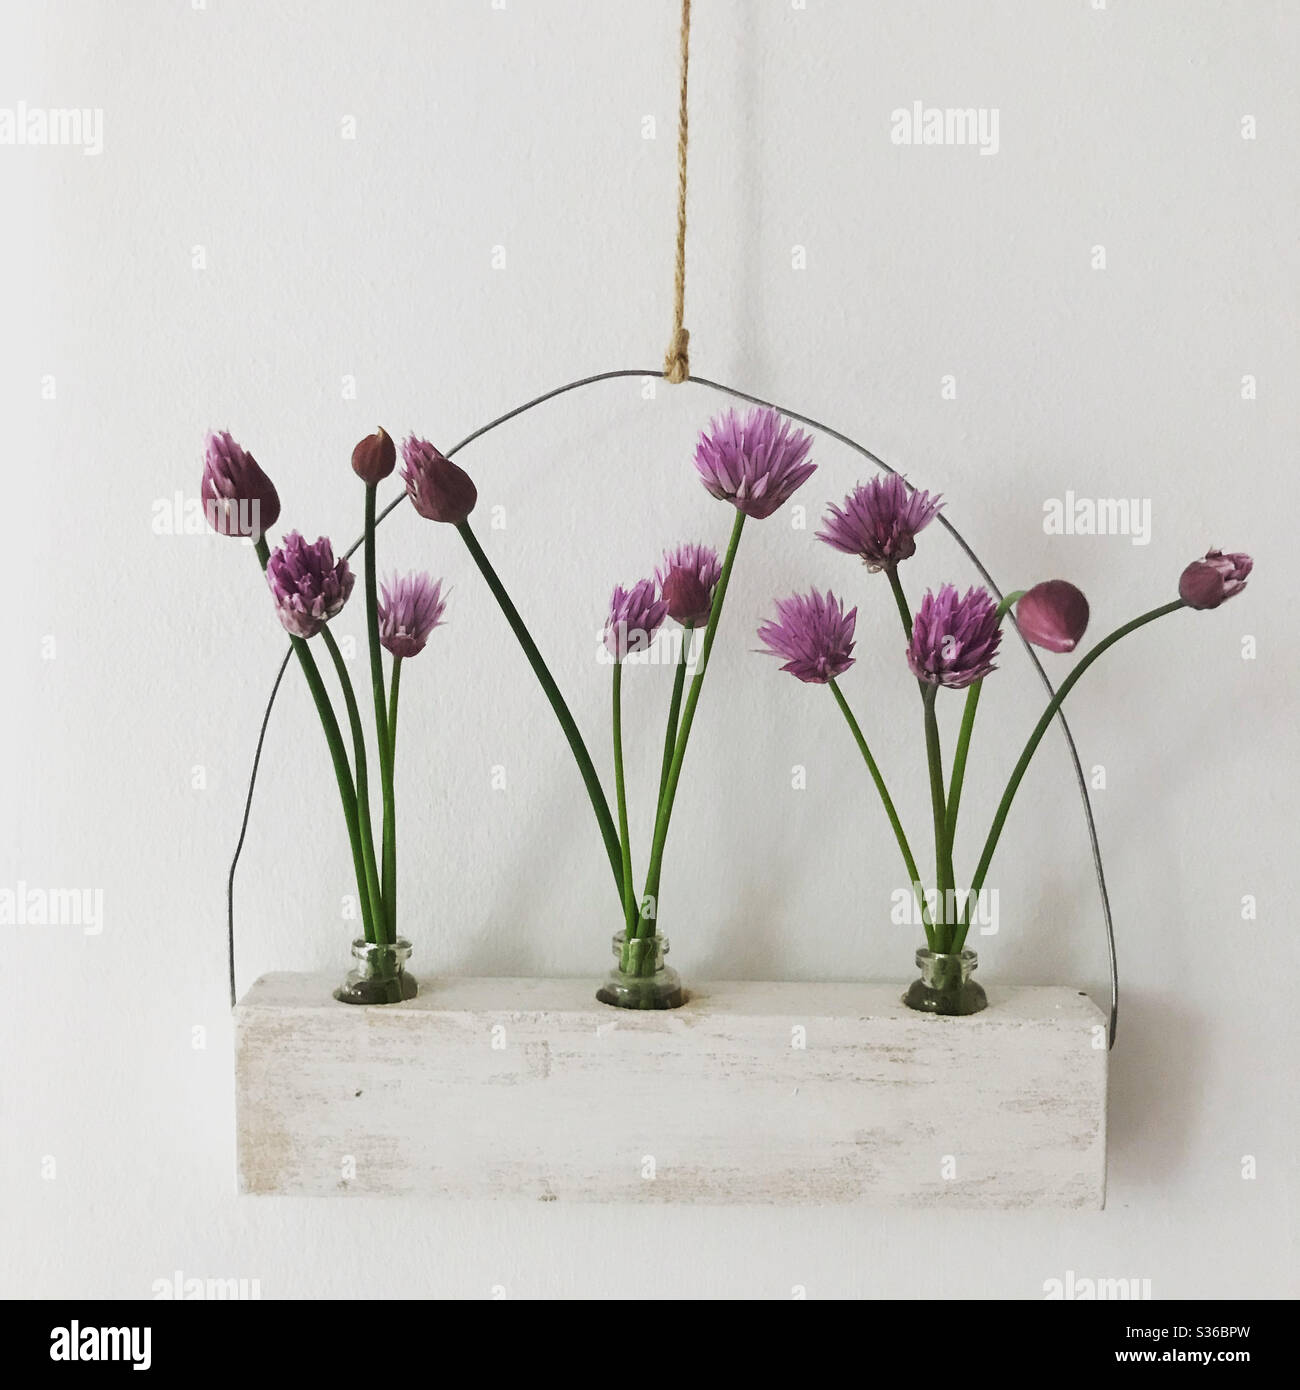 Chive flowers in a wall hanging set of three small vases against a white wall Stock Photo